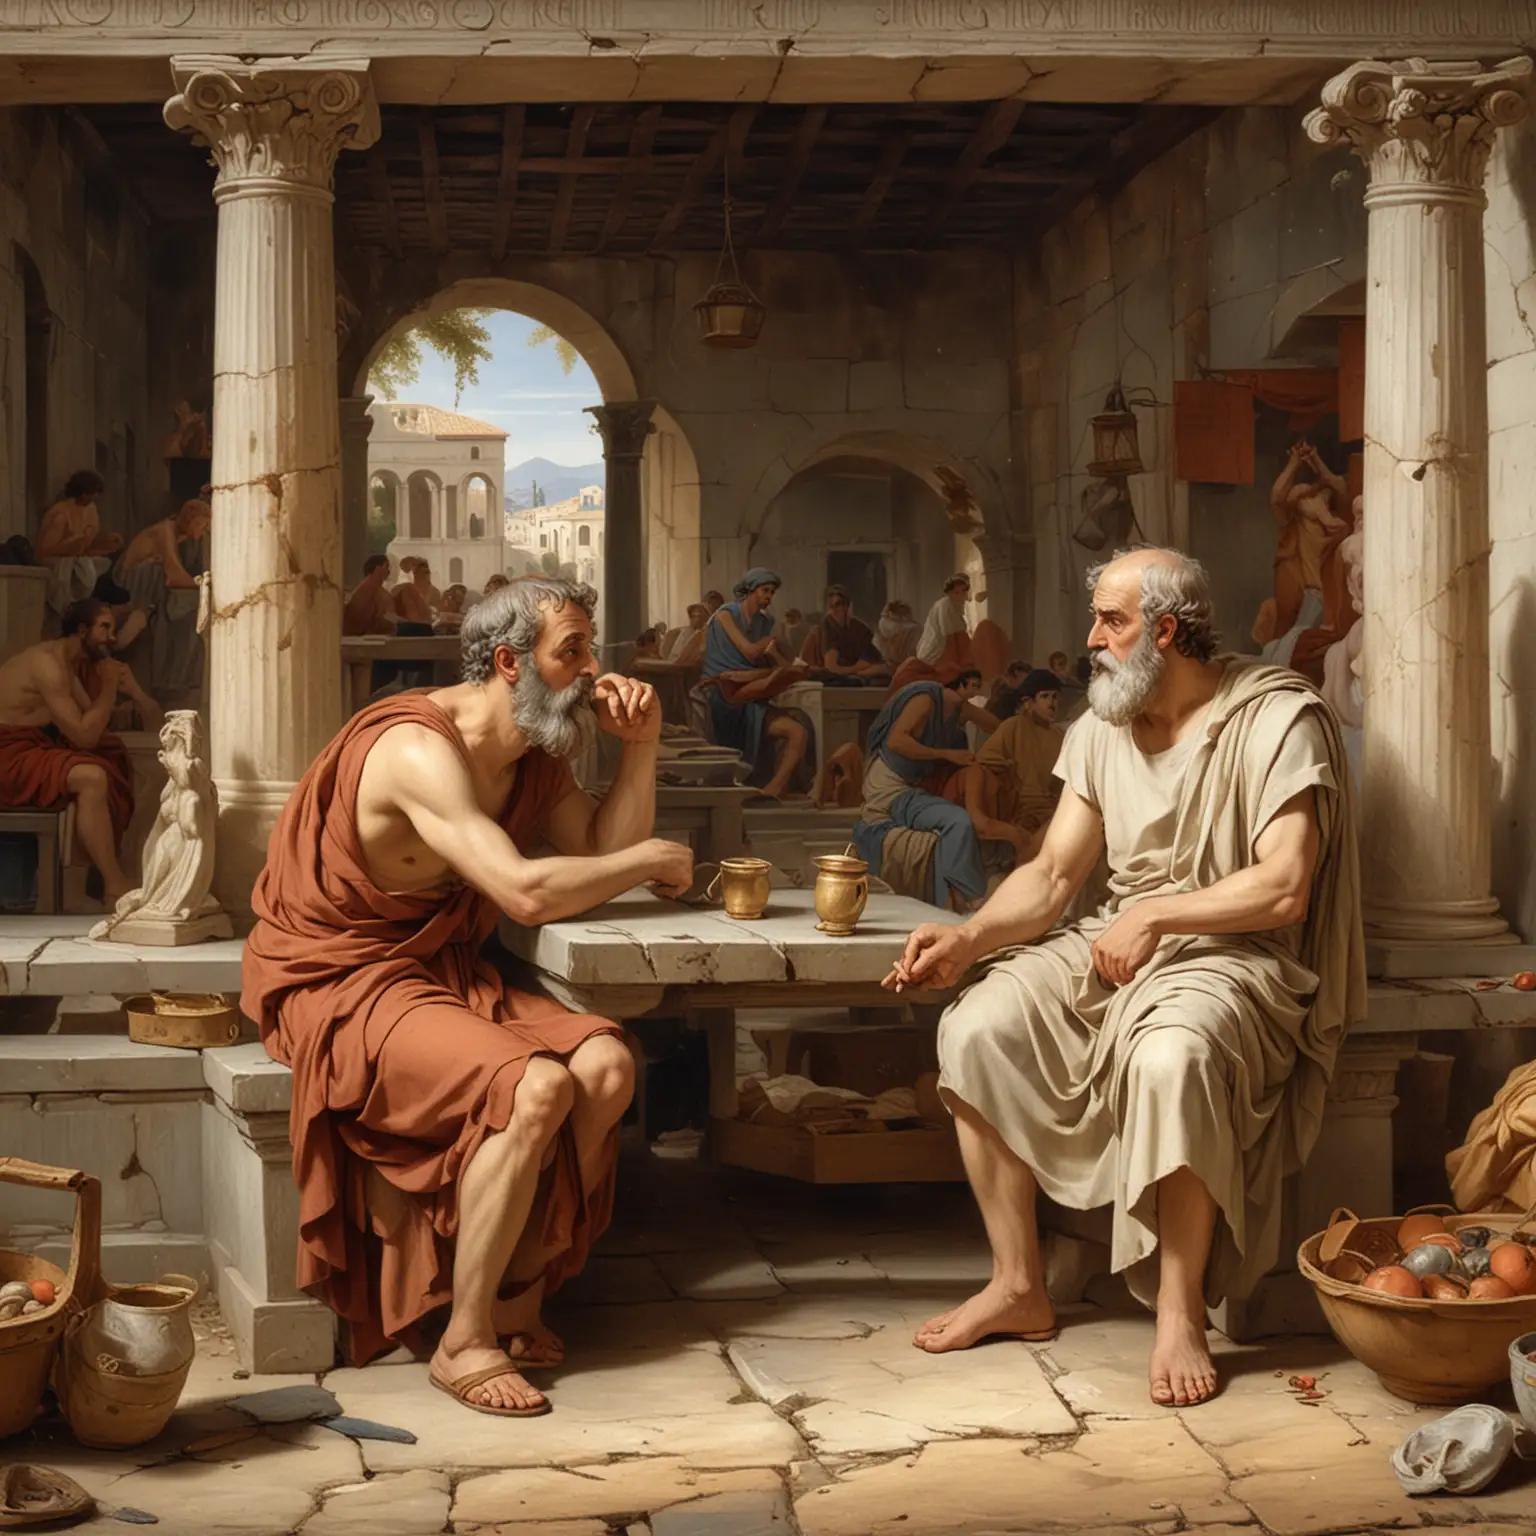 Plato and Aristotle discussing philosophy in the ancient Greek market place